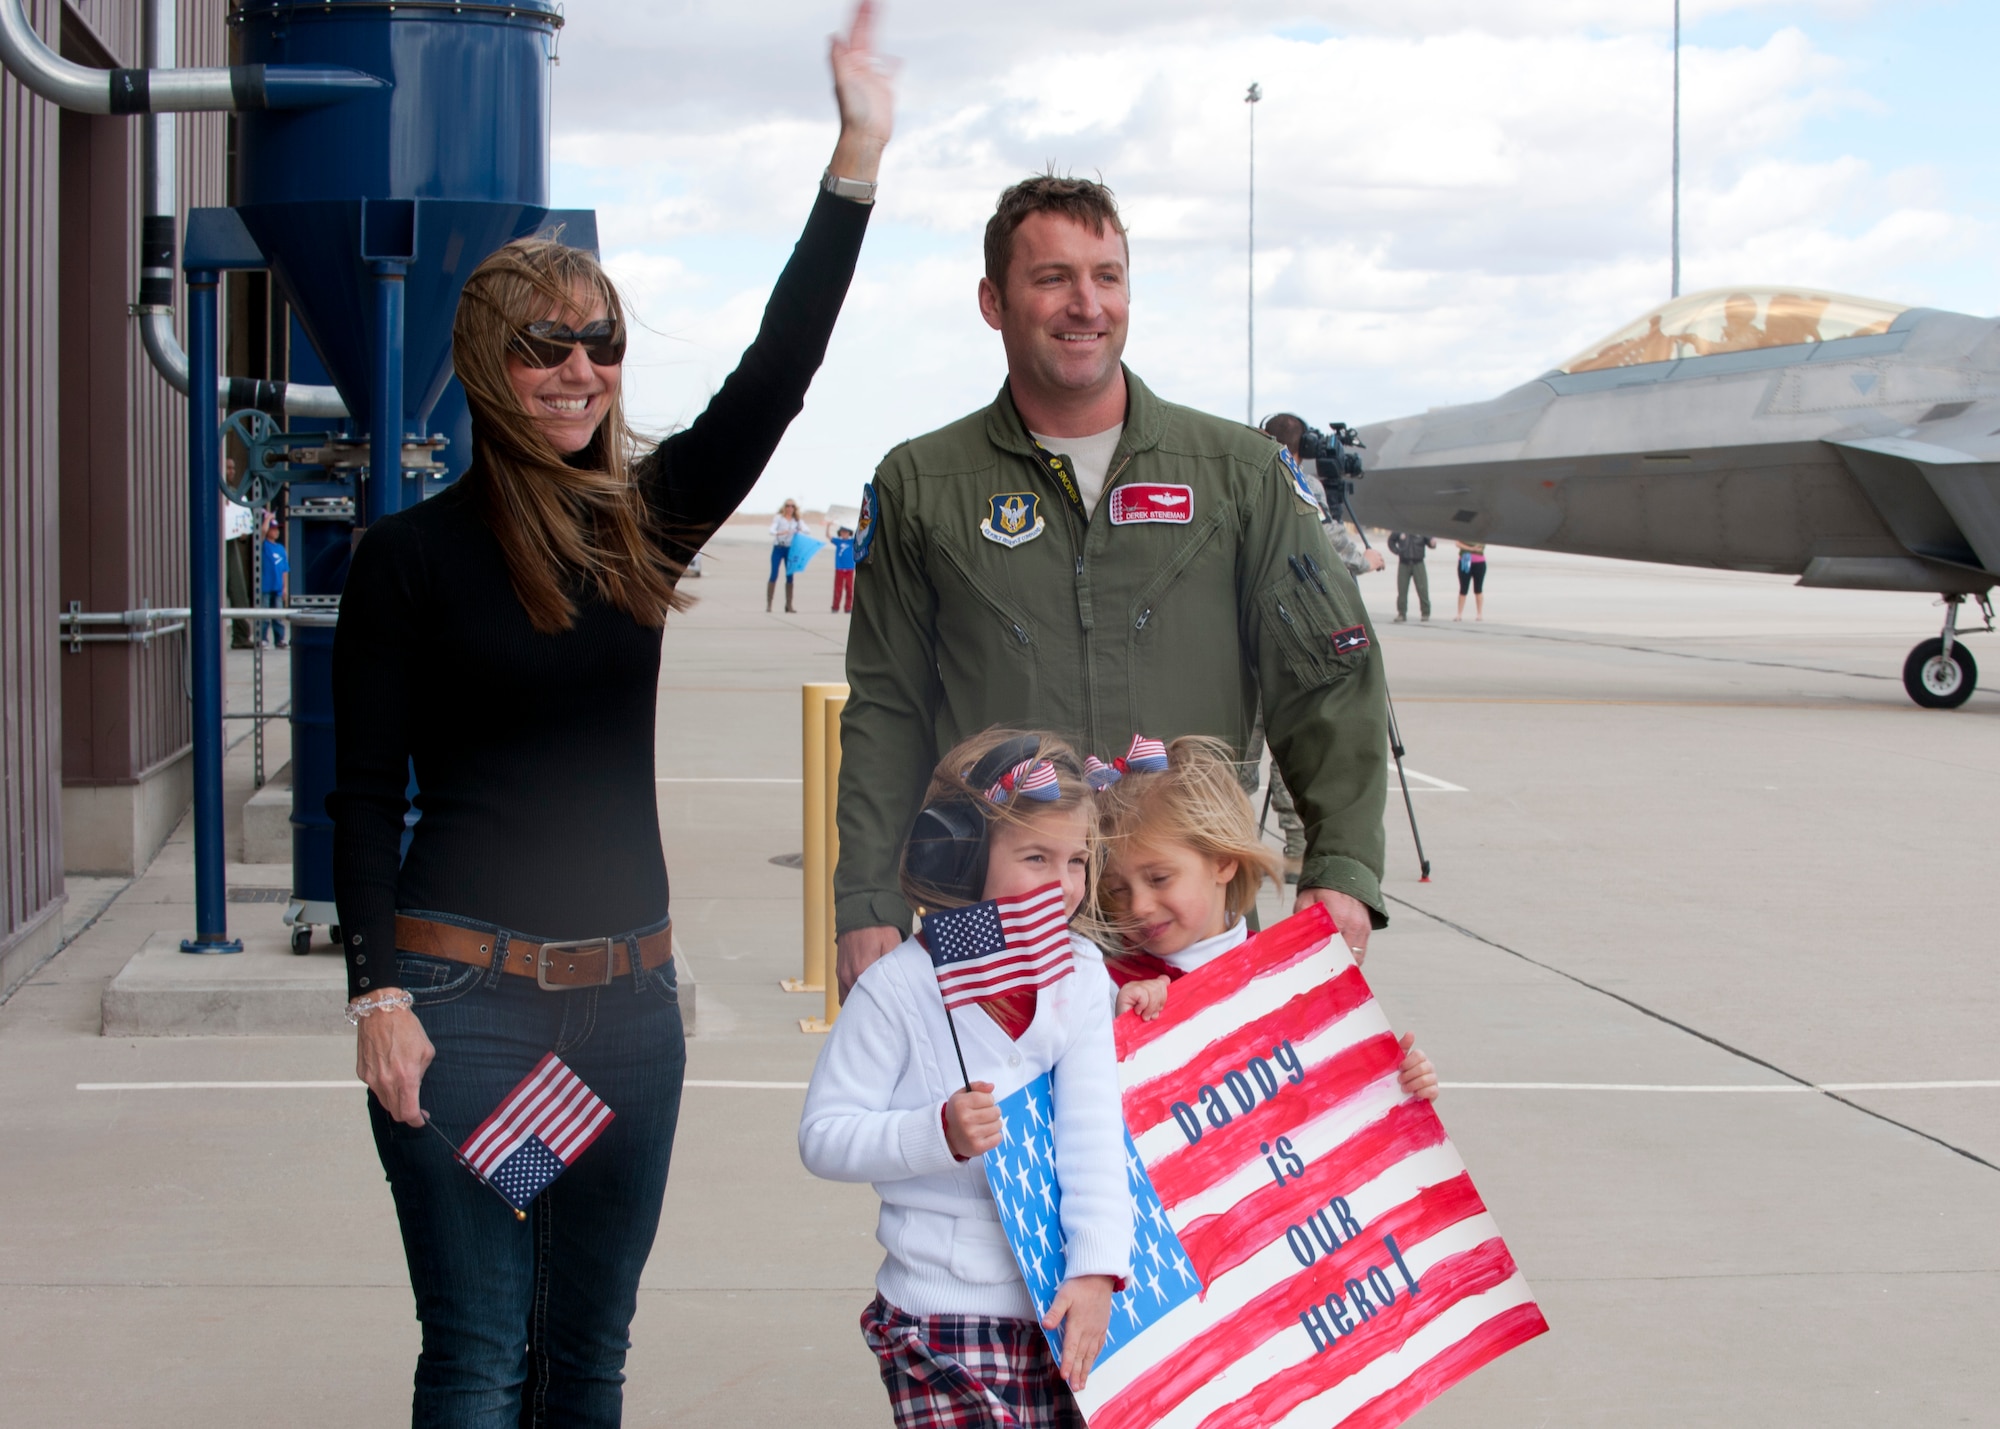 Friends and family await the return of the 7th Fighter Squadron F-22 Raptors pilots with homemade signs and flags on the Holloman AFB, N.M., flightline Jan. 28.  The F-22 Raptors and around 200 personnel returned Monday from a 9-month deployment to Southwest Asia ensuring regional security and joint tactical air operations. (U.S. Air Force photo by Airman 1st Class Leah Murray/Released)
	
